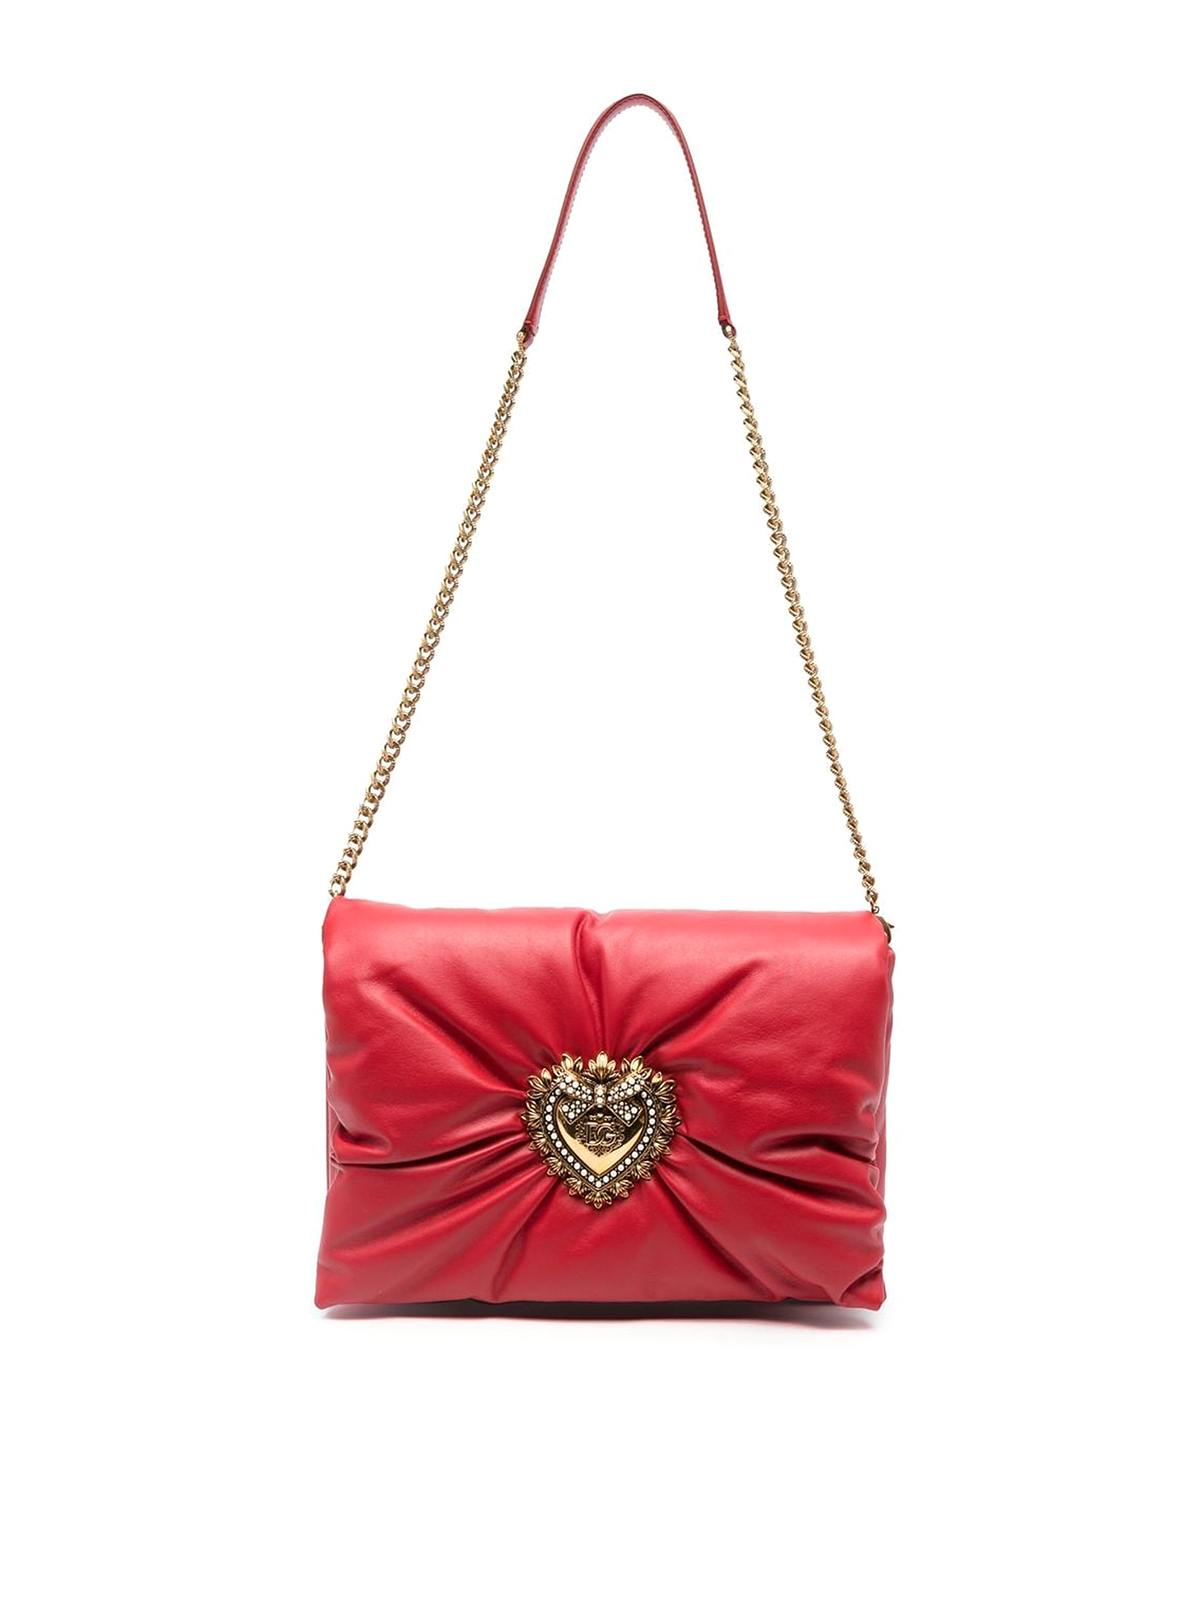 Dolce & Gabbana Dolce Gabbana Devotion Quilted Clutch Bag In Red